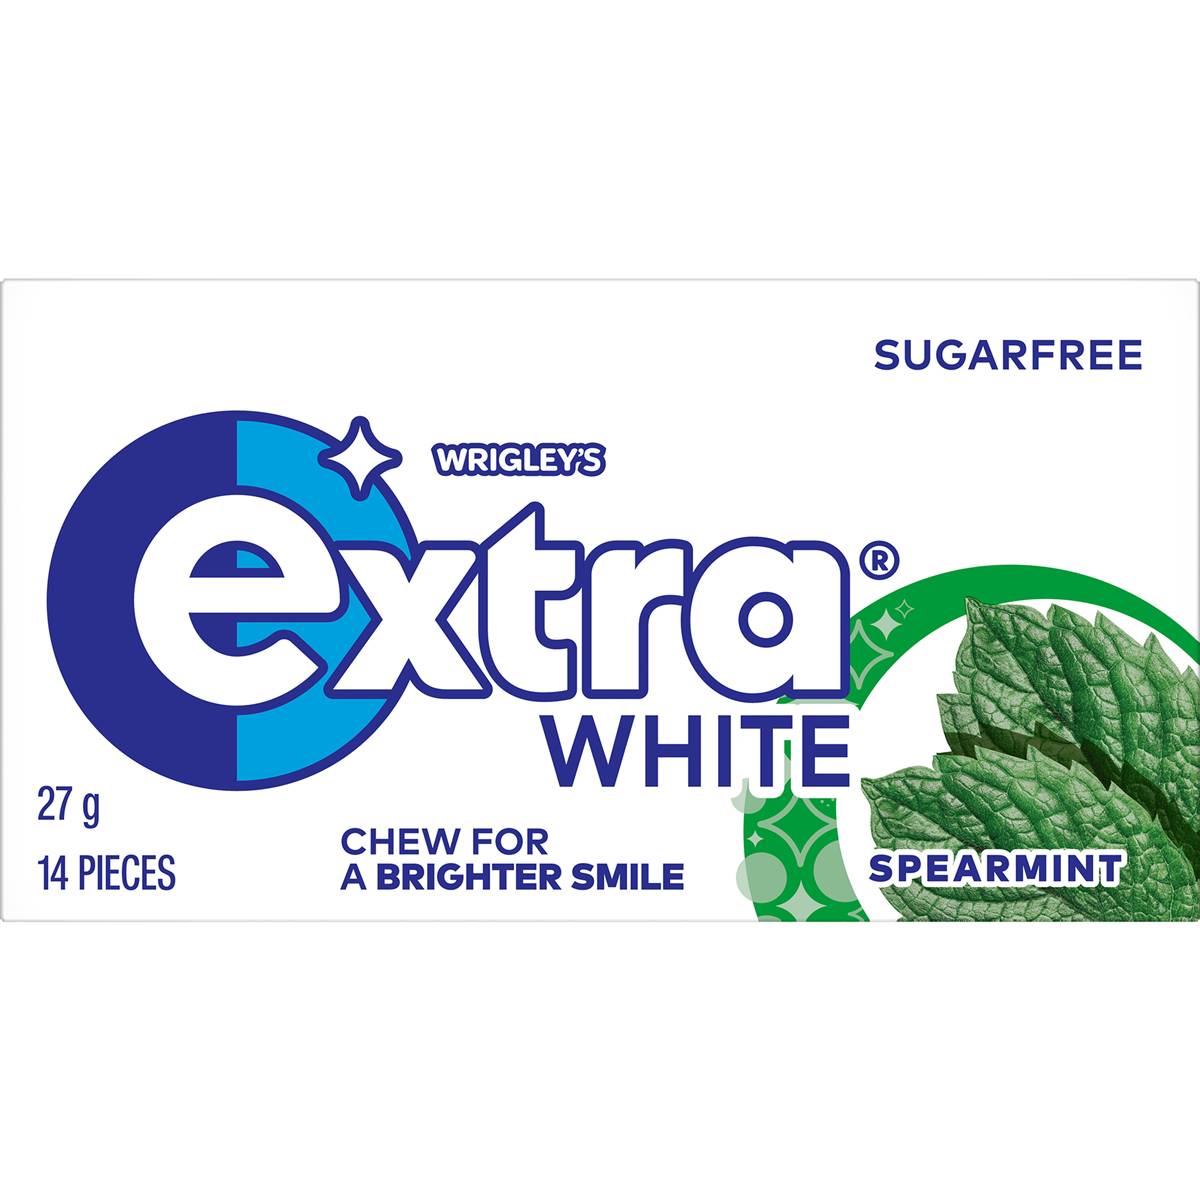 Calories in Extra White Spearmint Sugar Free Chewing Gum 14pc